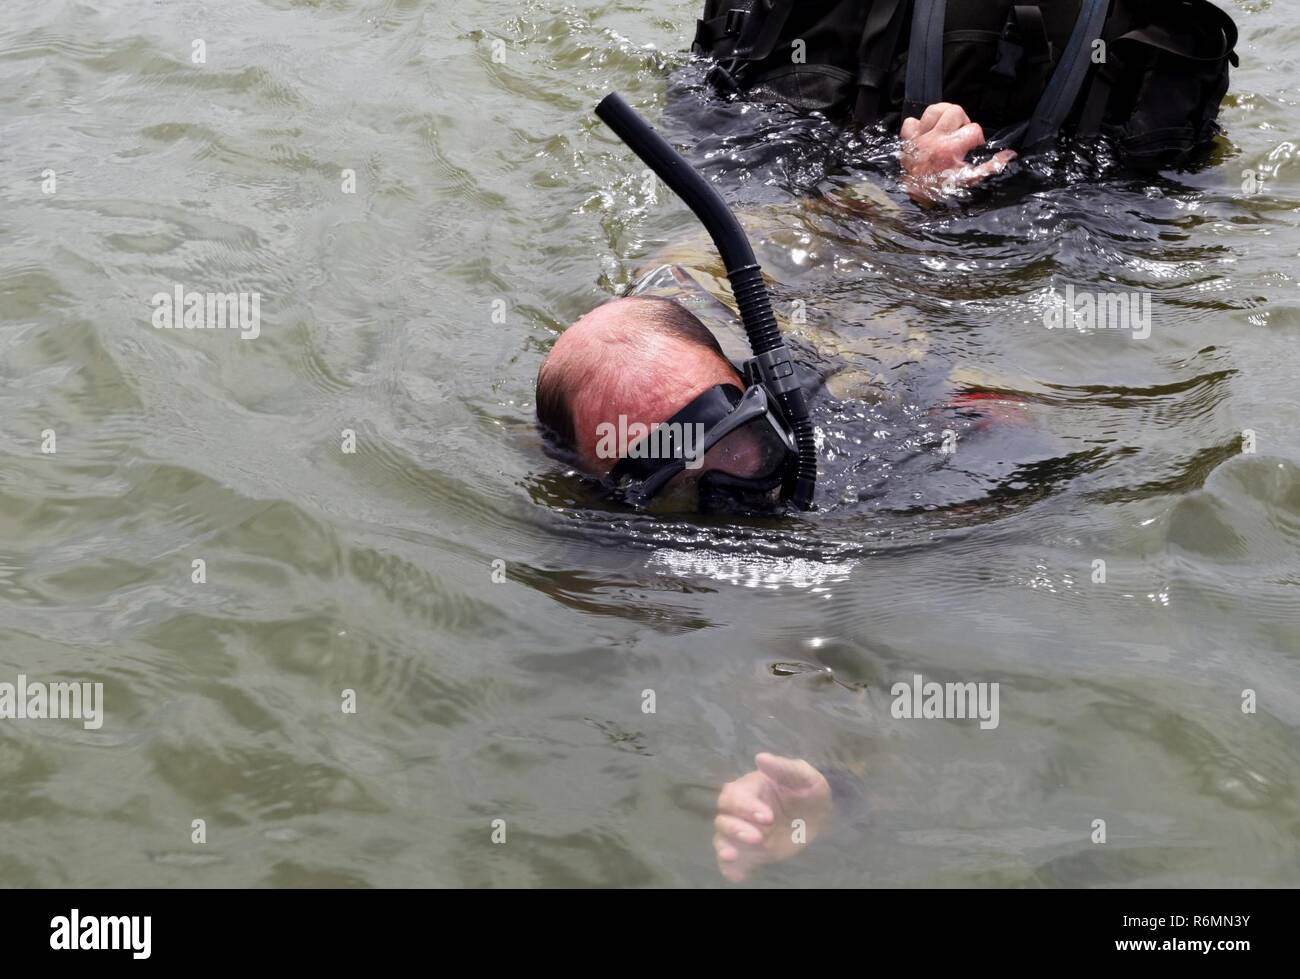 Master Sgt. Clinton Woodford, 181st Weather Flight special operations weatherman, swims to the recovery boat with his gear after a deliberate water drop into Lake Worth in Forth Worth, Texas,  May 20, 2017. The jump was part of an exercise to train on tactical skills when operating in hostile and denied territories. (Texas Air National Guard Stock Photo